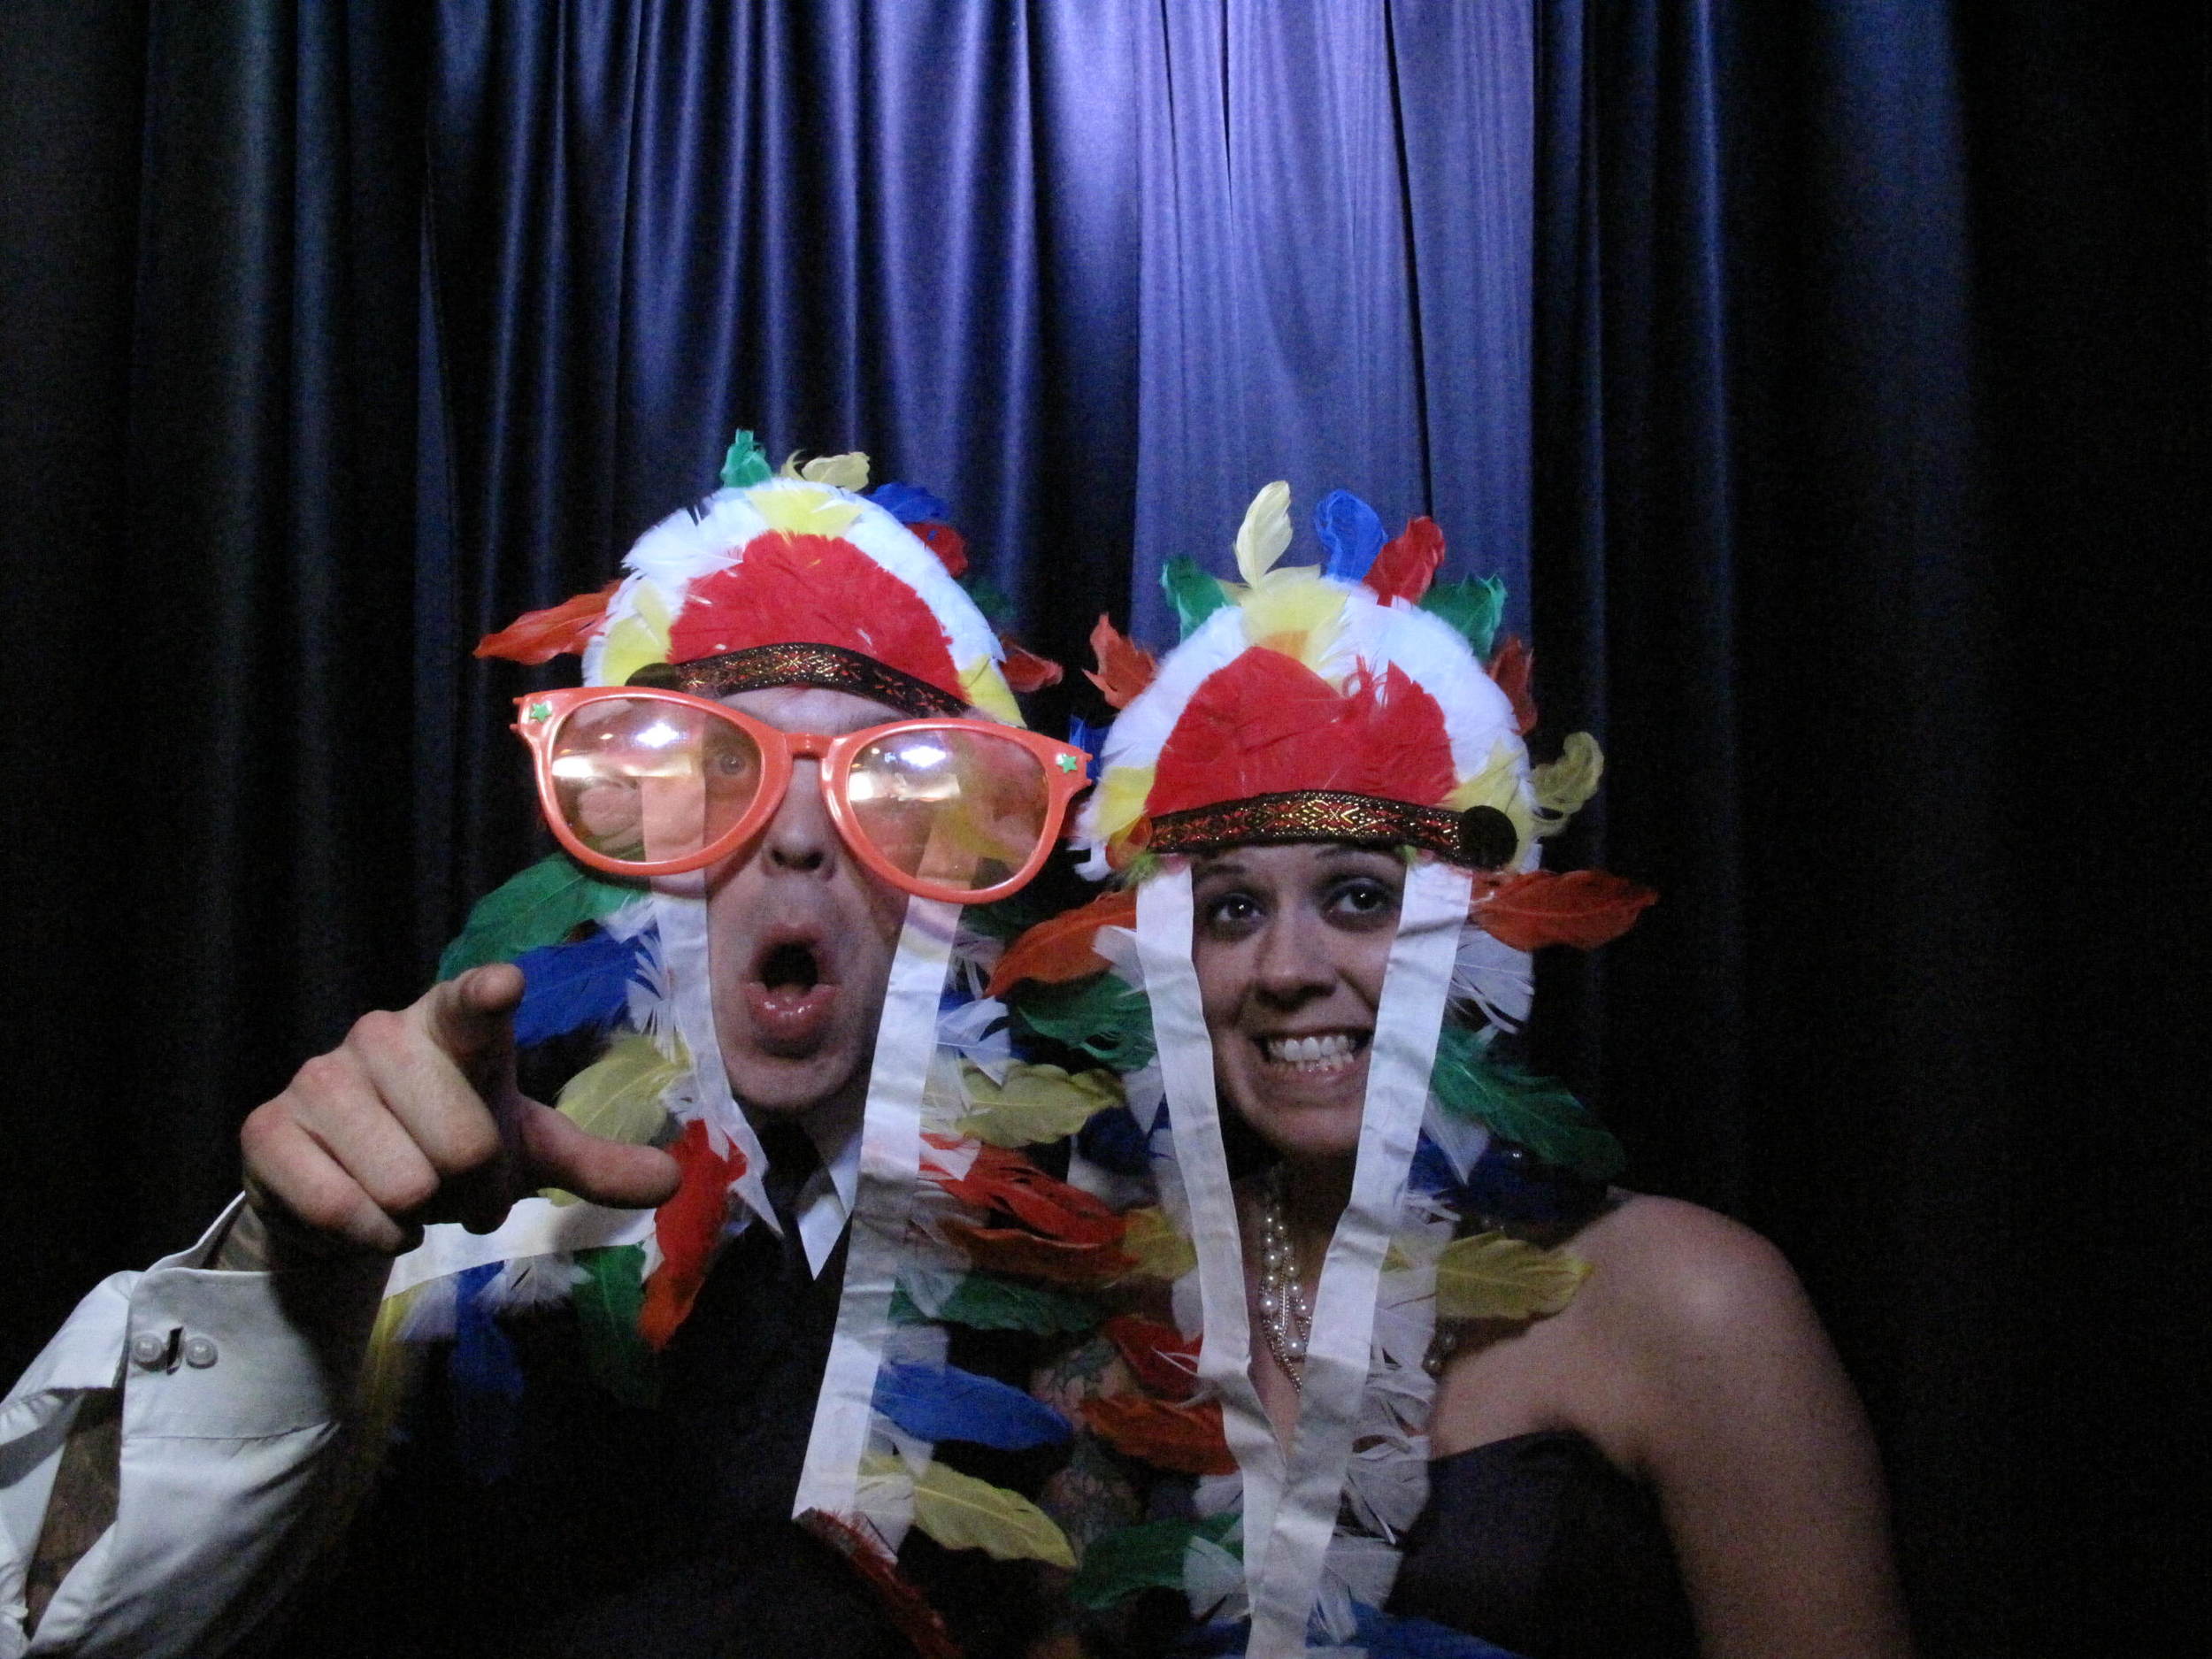 Snapshot Photobooths at the Windsor Ballroom at the Holiday Inn in East Windsor, New Jersey